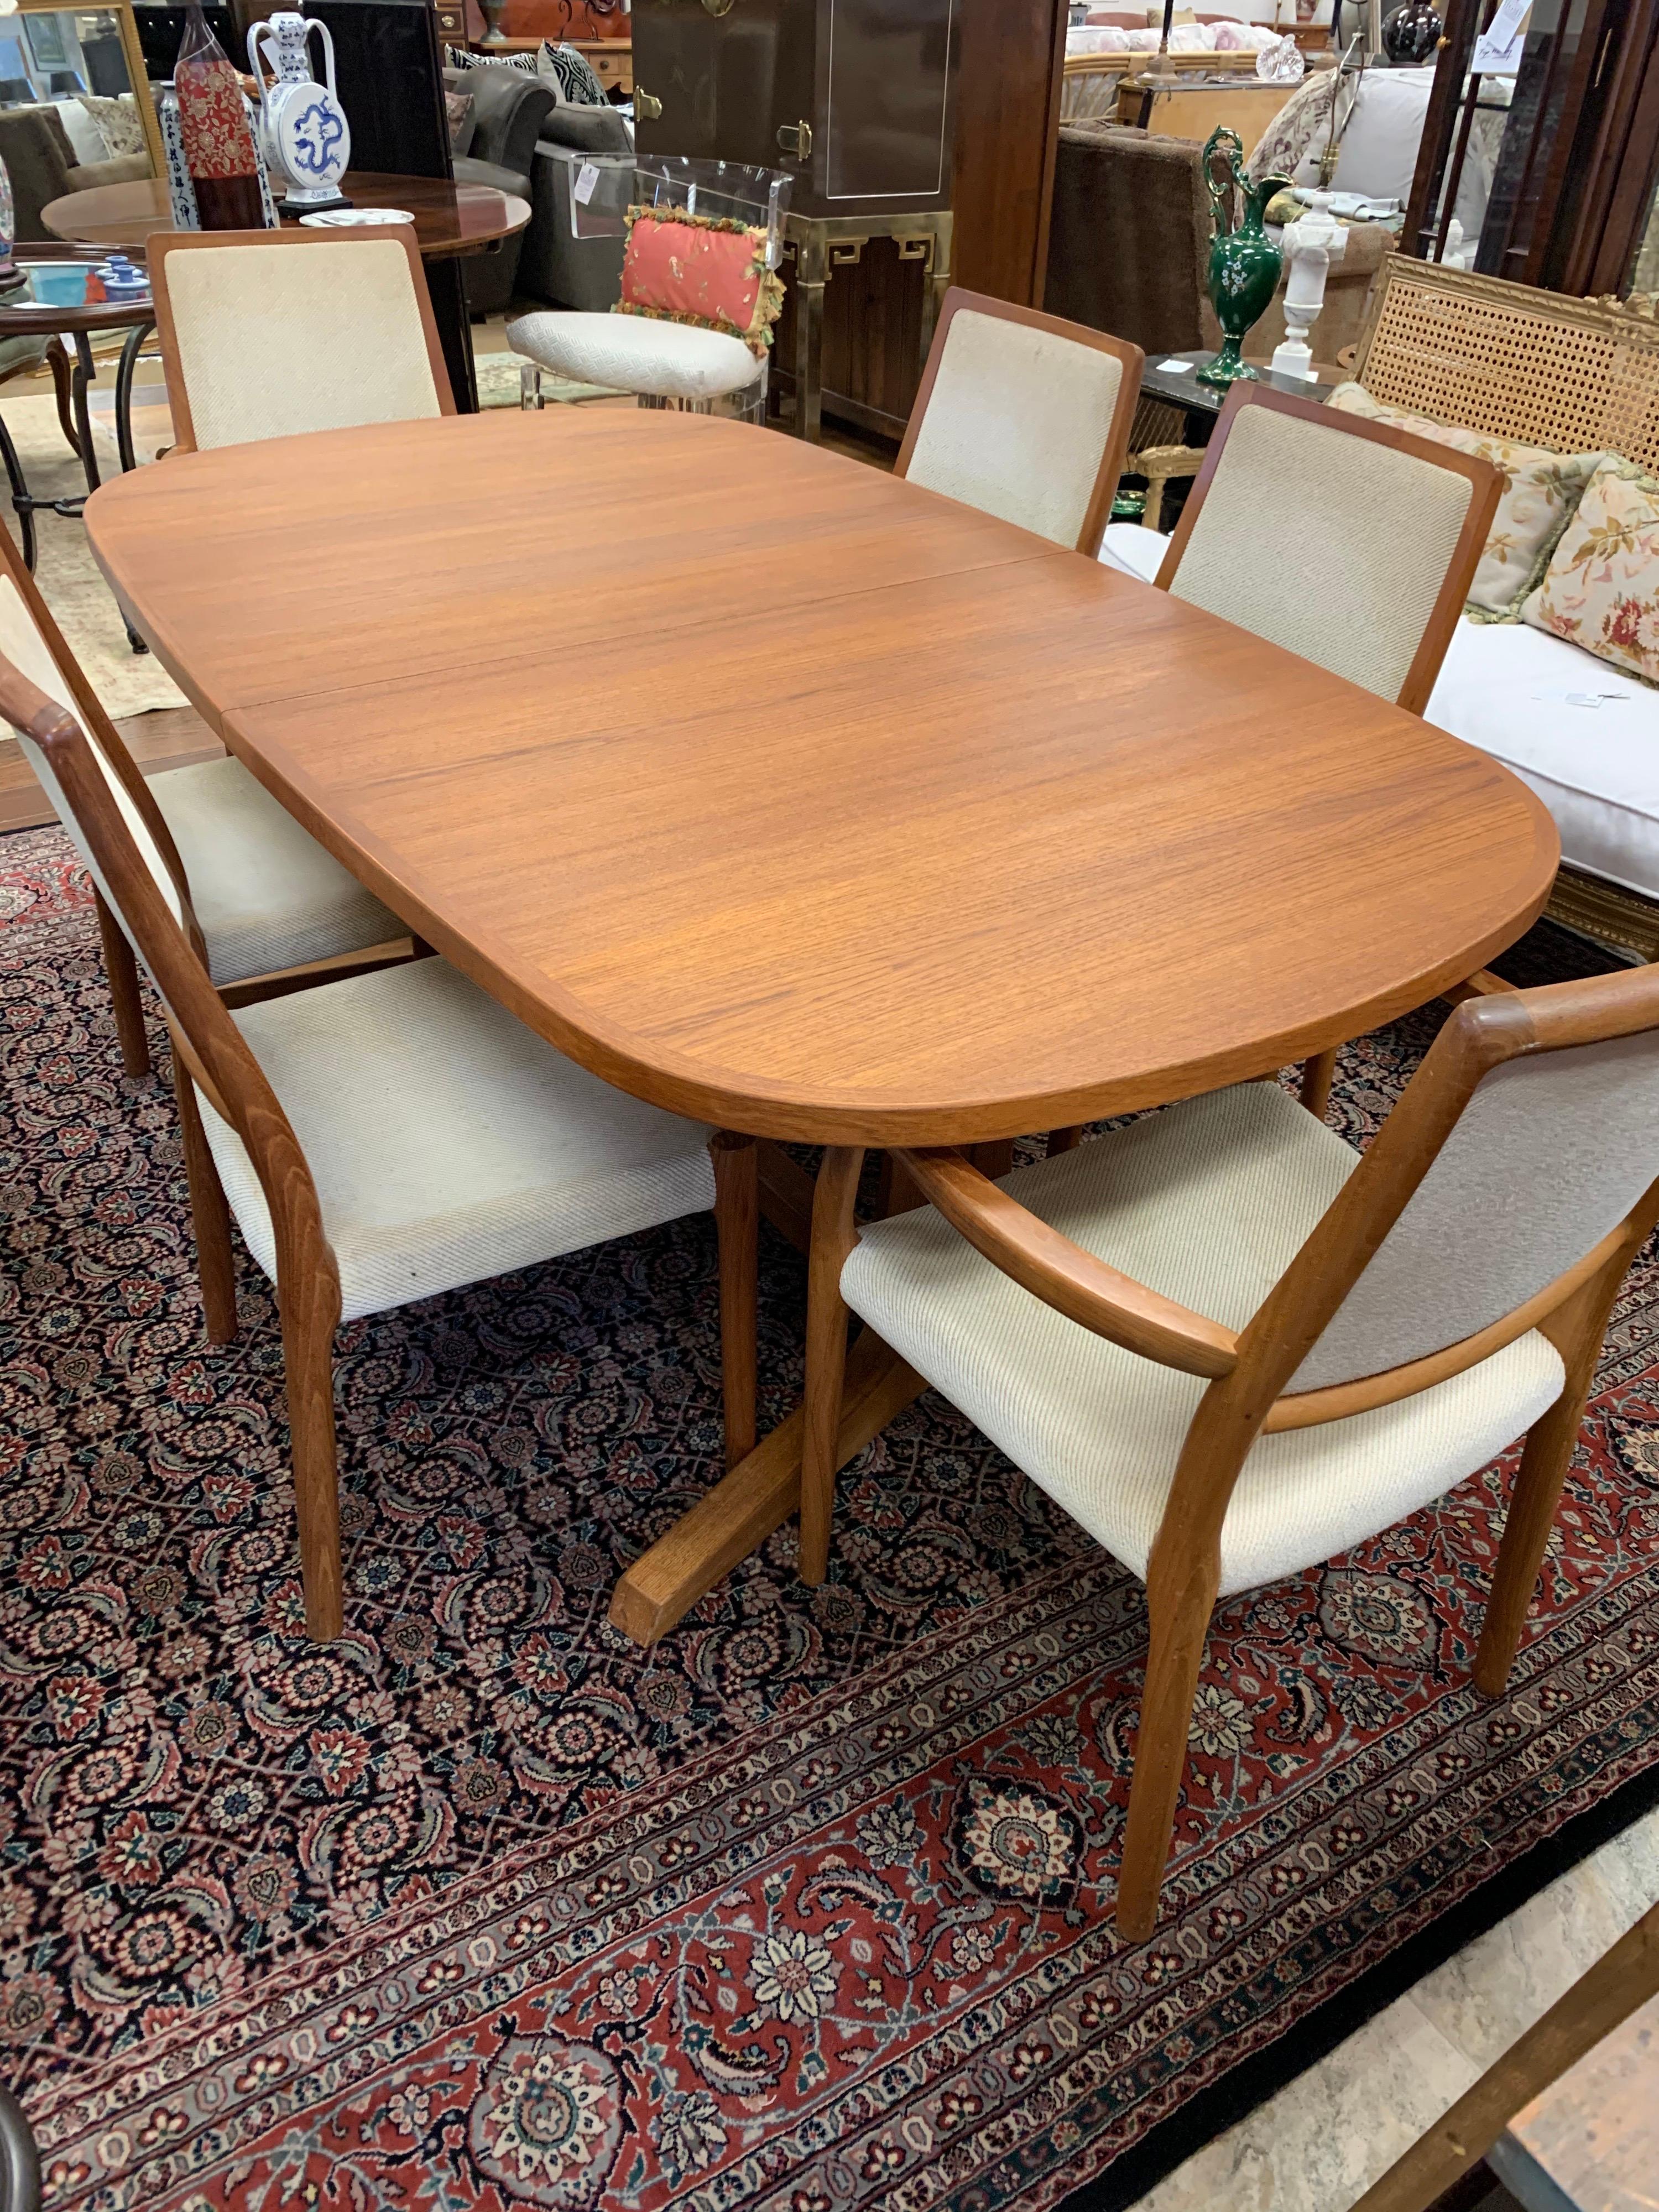 Fabric Niels Otto Moller for JL Moller Danish Modern Dining Room Set Table & 6 Chairs